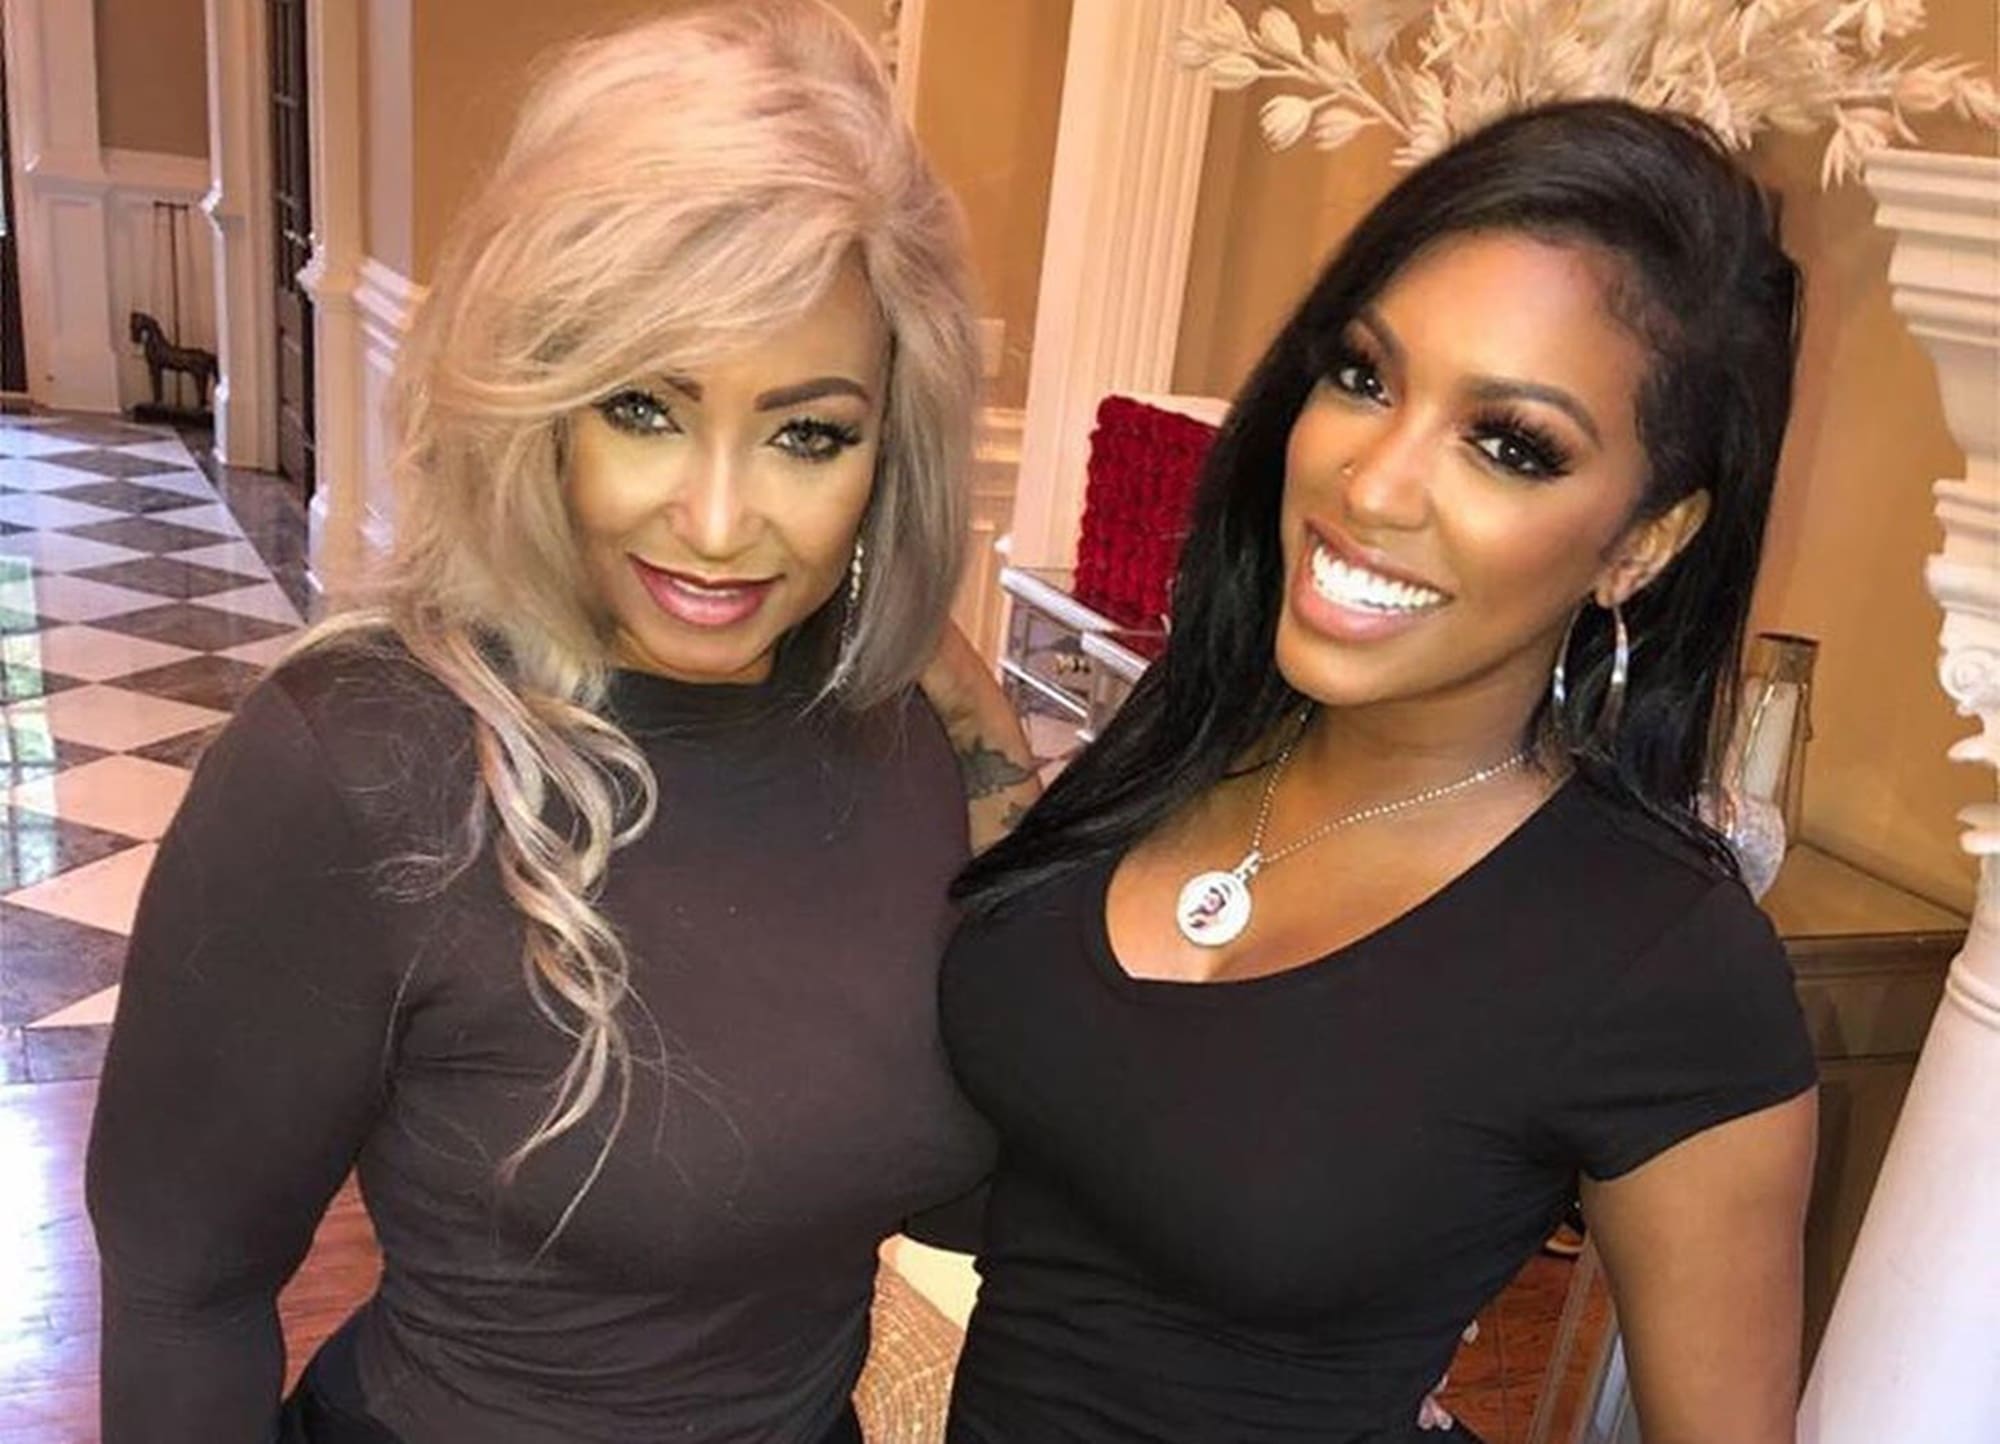 Porsha Williams Gushes Over Her Gorgeous Mother On Social Media - People Want Ms. Diane On RHOA